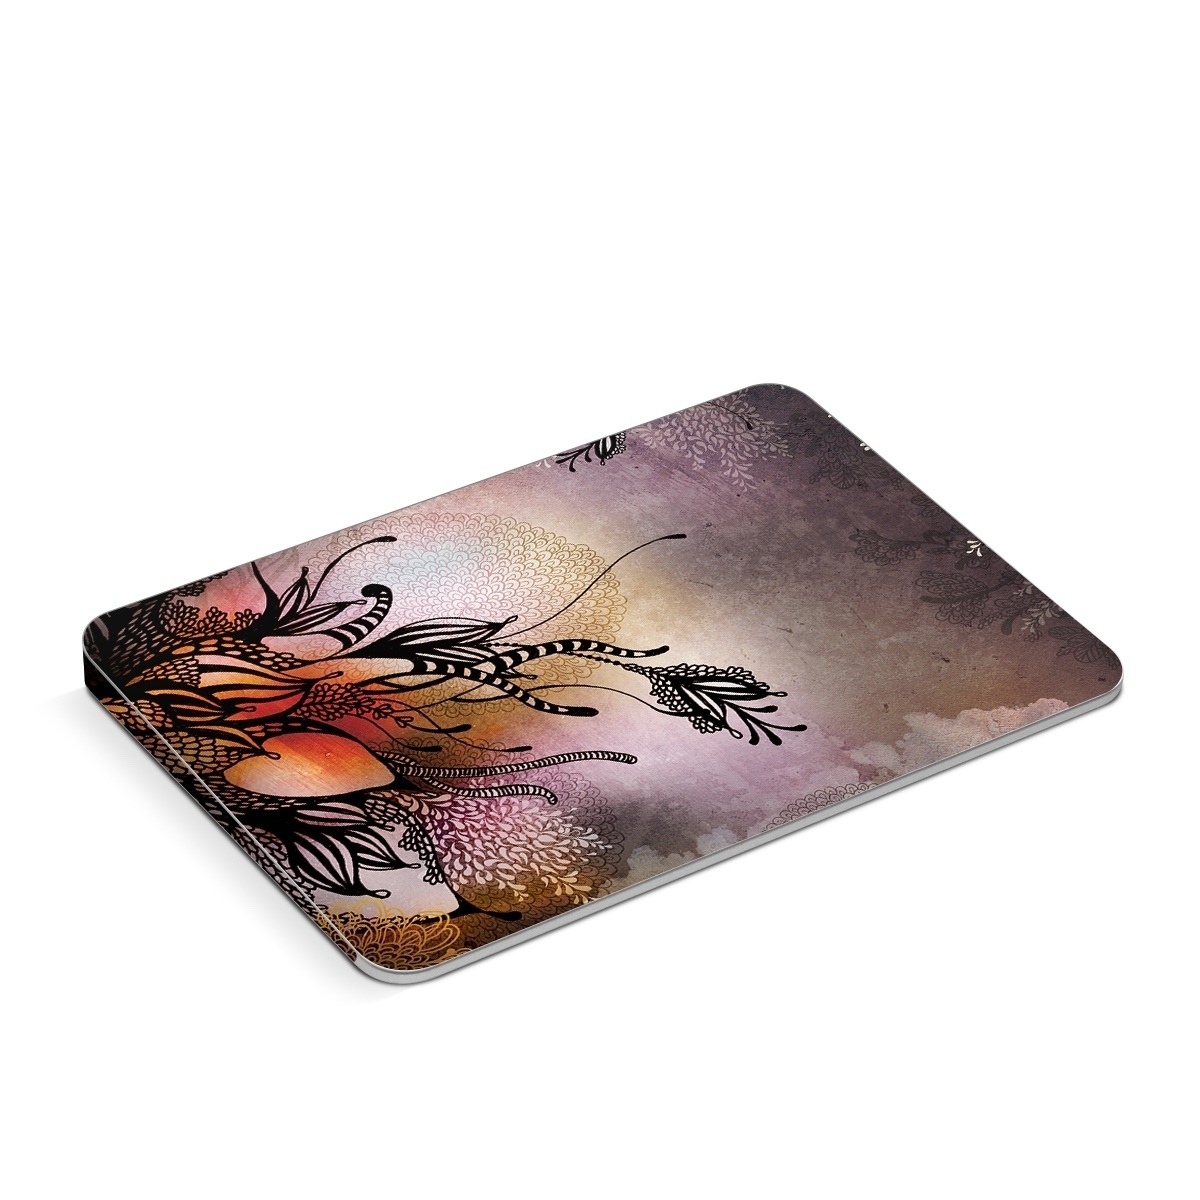 Apple Magic Trackpad Skin design of Illustration, Graphic design, Cg artwork, Art, Fictional character, Graphics, Visual arts, Darkness, with black, gray, red, green, purple colors